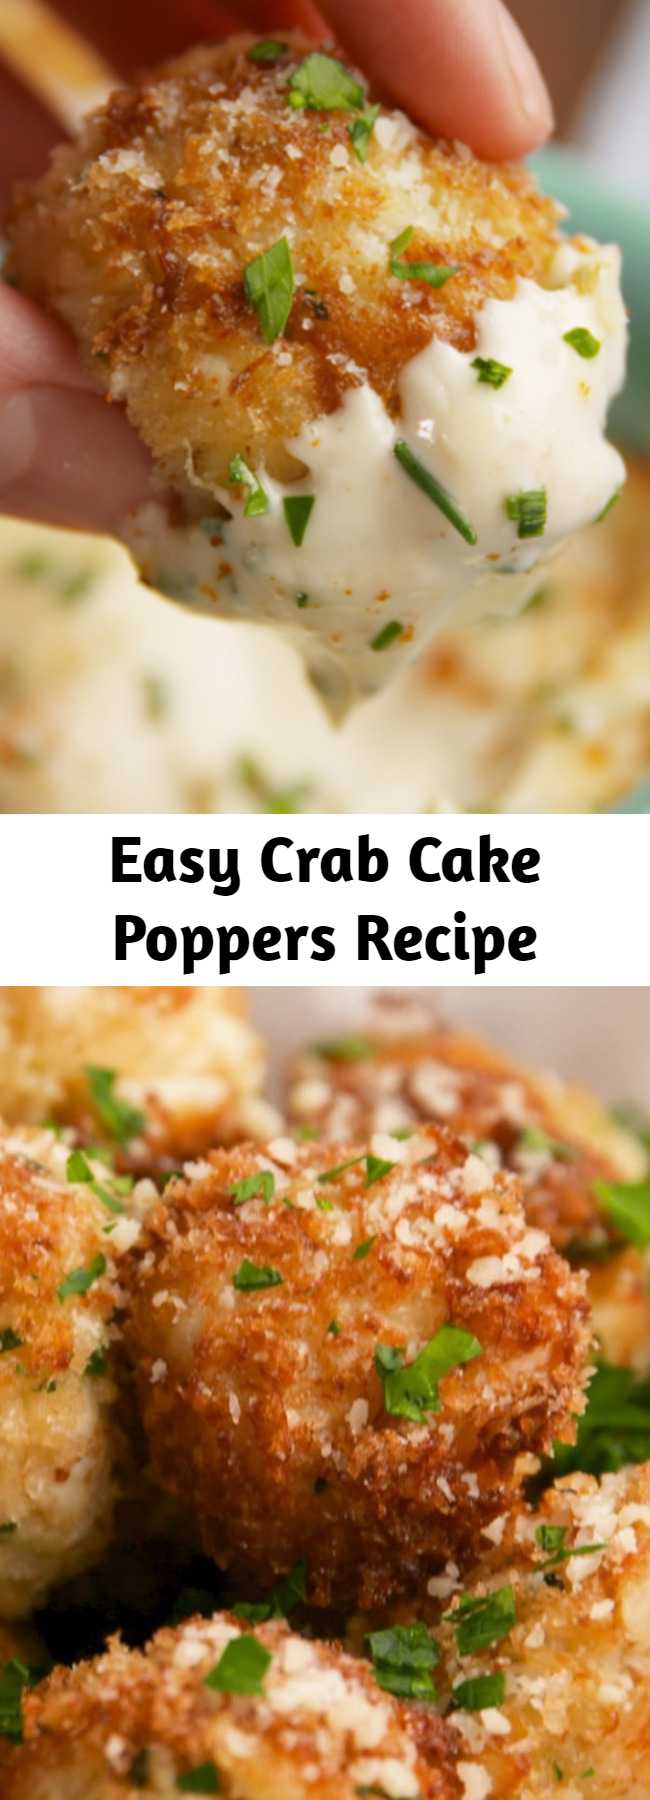 Easy Crab Cake Poppers Recipe - These are basically mini crab cakes that you won't be able to stop eating. #easy #recipe #crab #crabcakes #poppers #bites #seafood #appetizer #party